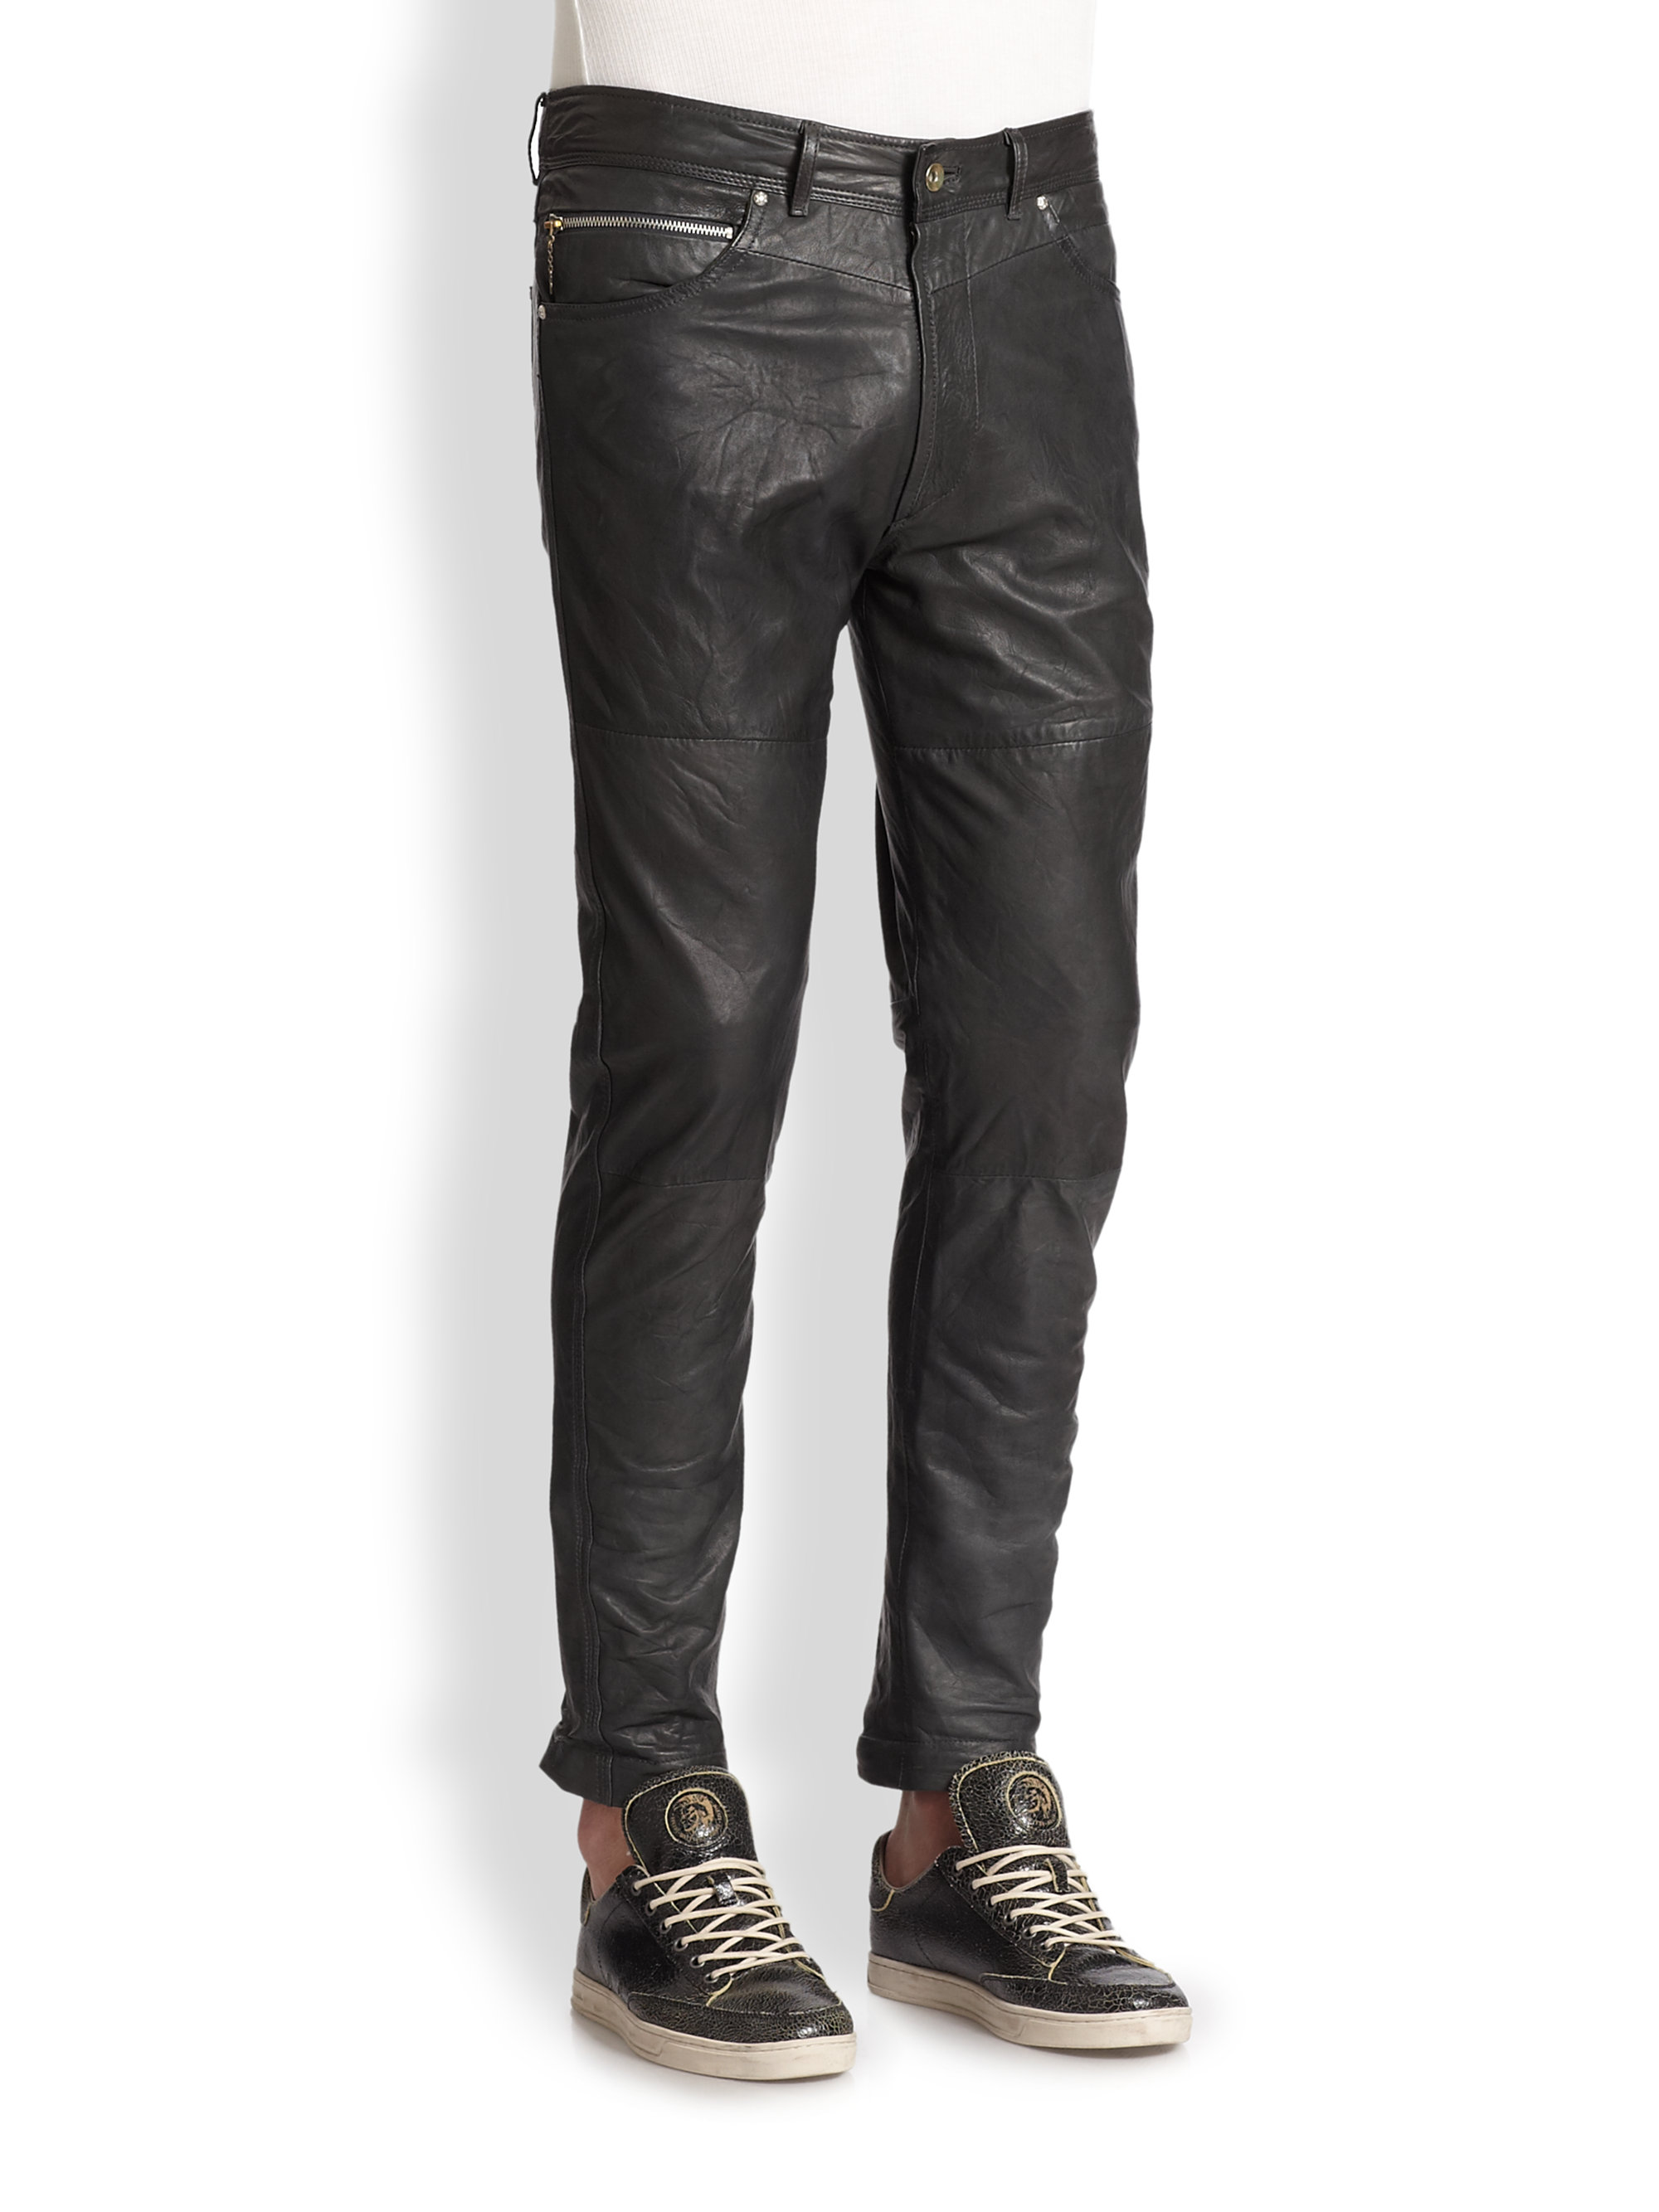 DIESEL Leather Pants in Charcoal (Gray) for Men - Lyst